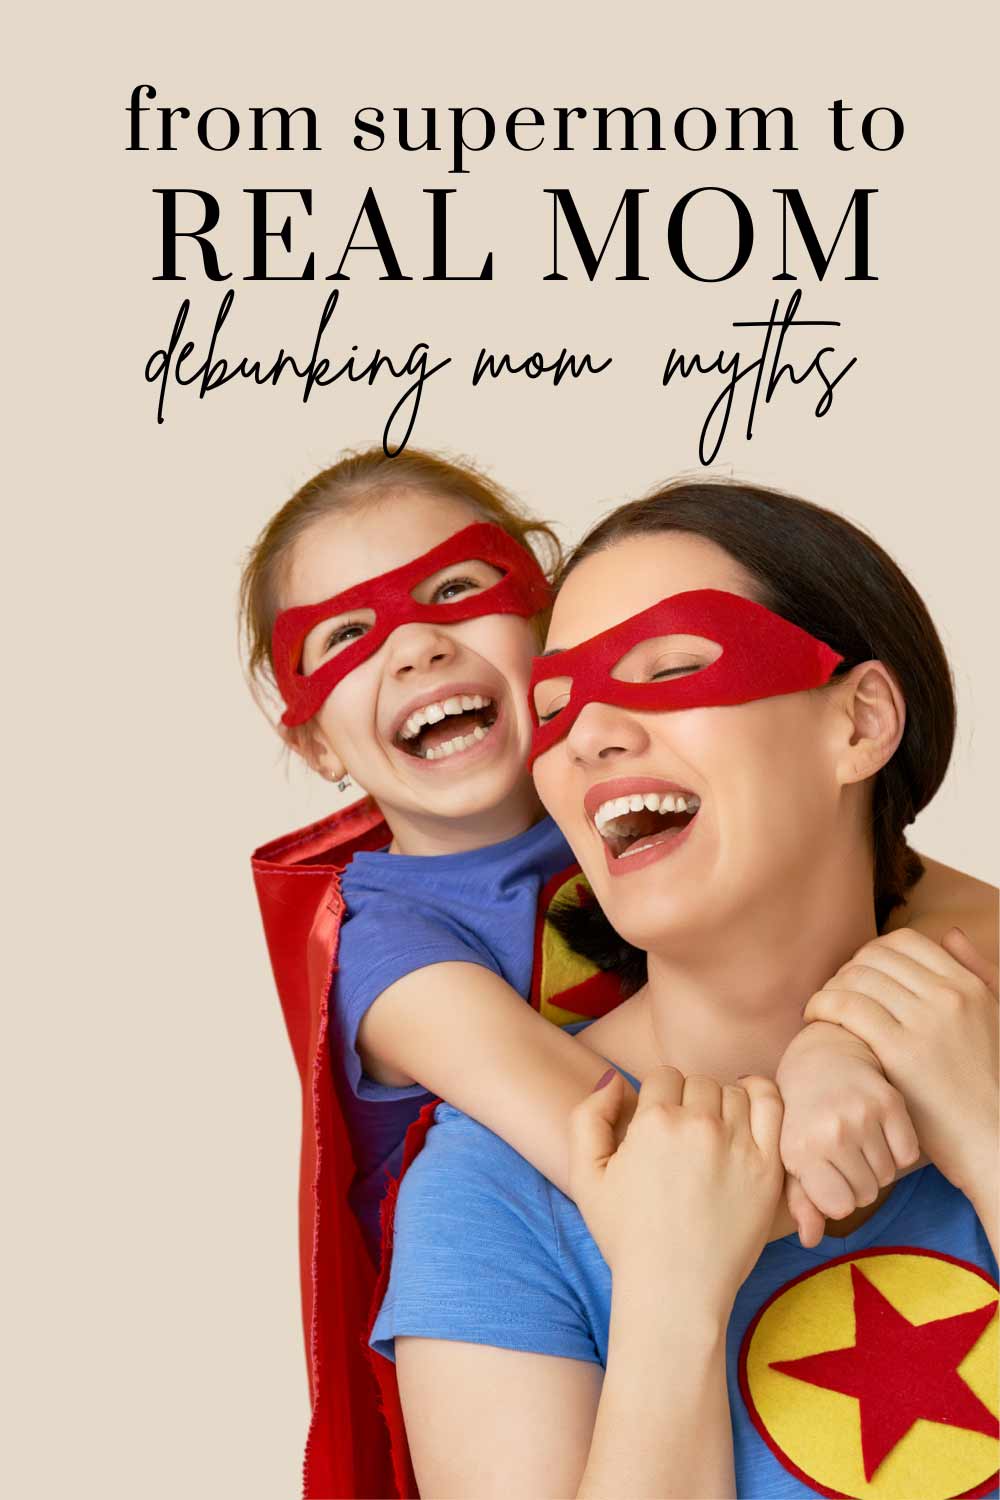 From Supermom to Real Mom: Debunking Mom Myths